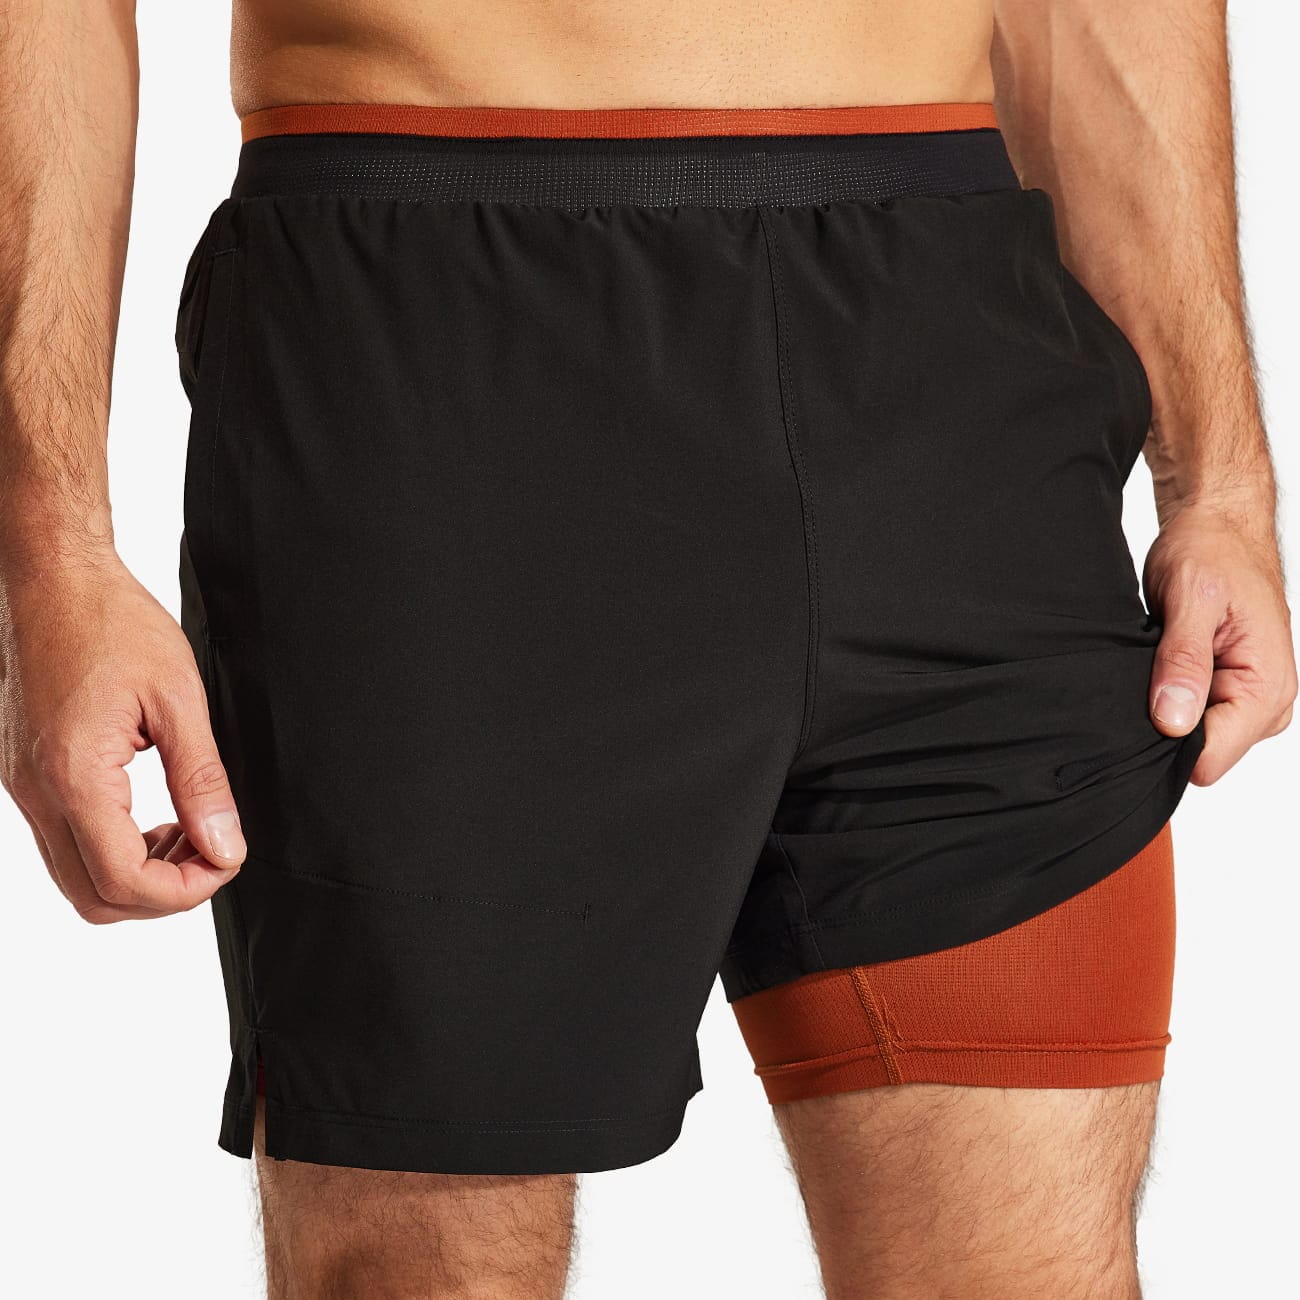 Men's 2 in 1 Running Shorts with Liner 5 Quick Dry Athletic Shorts - Black  Orange / S